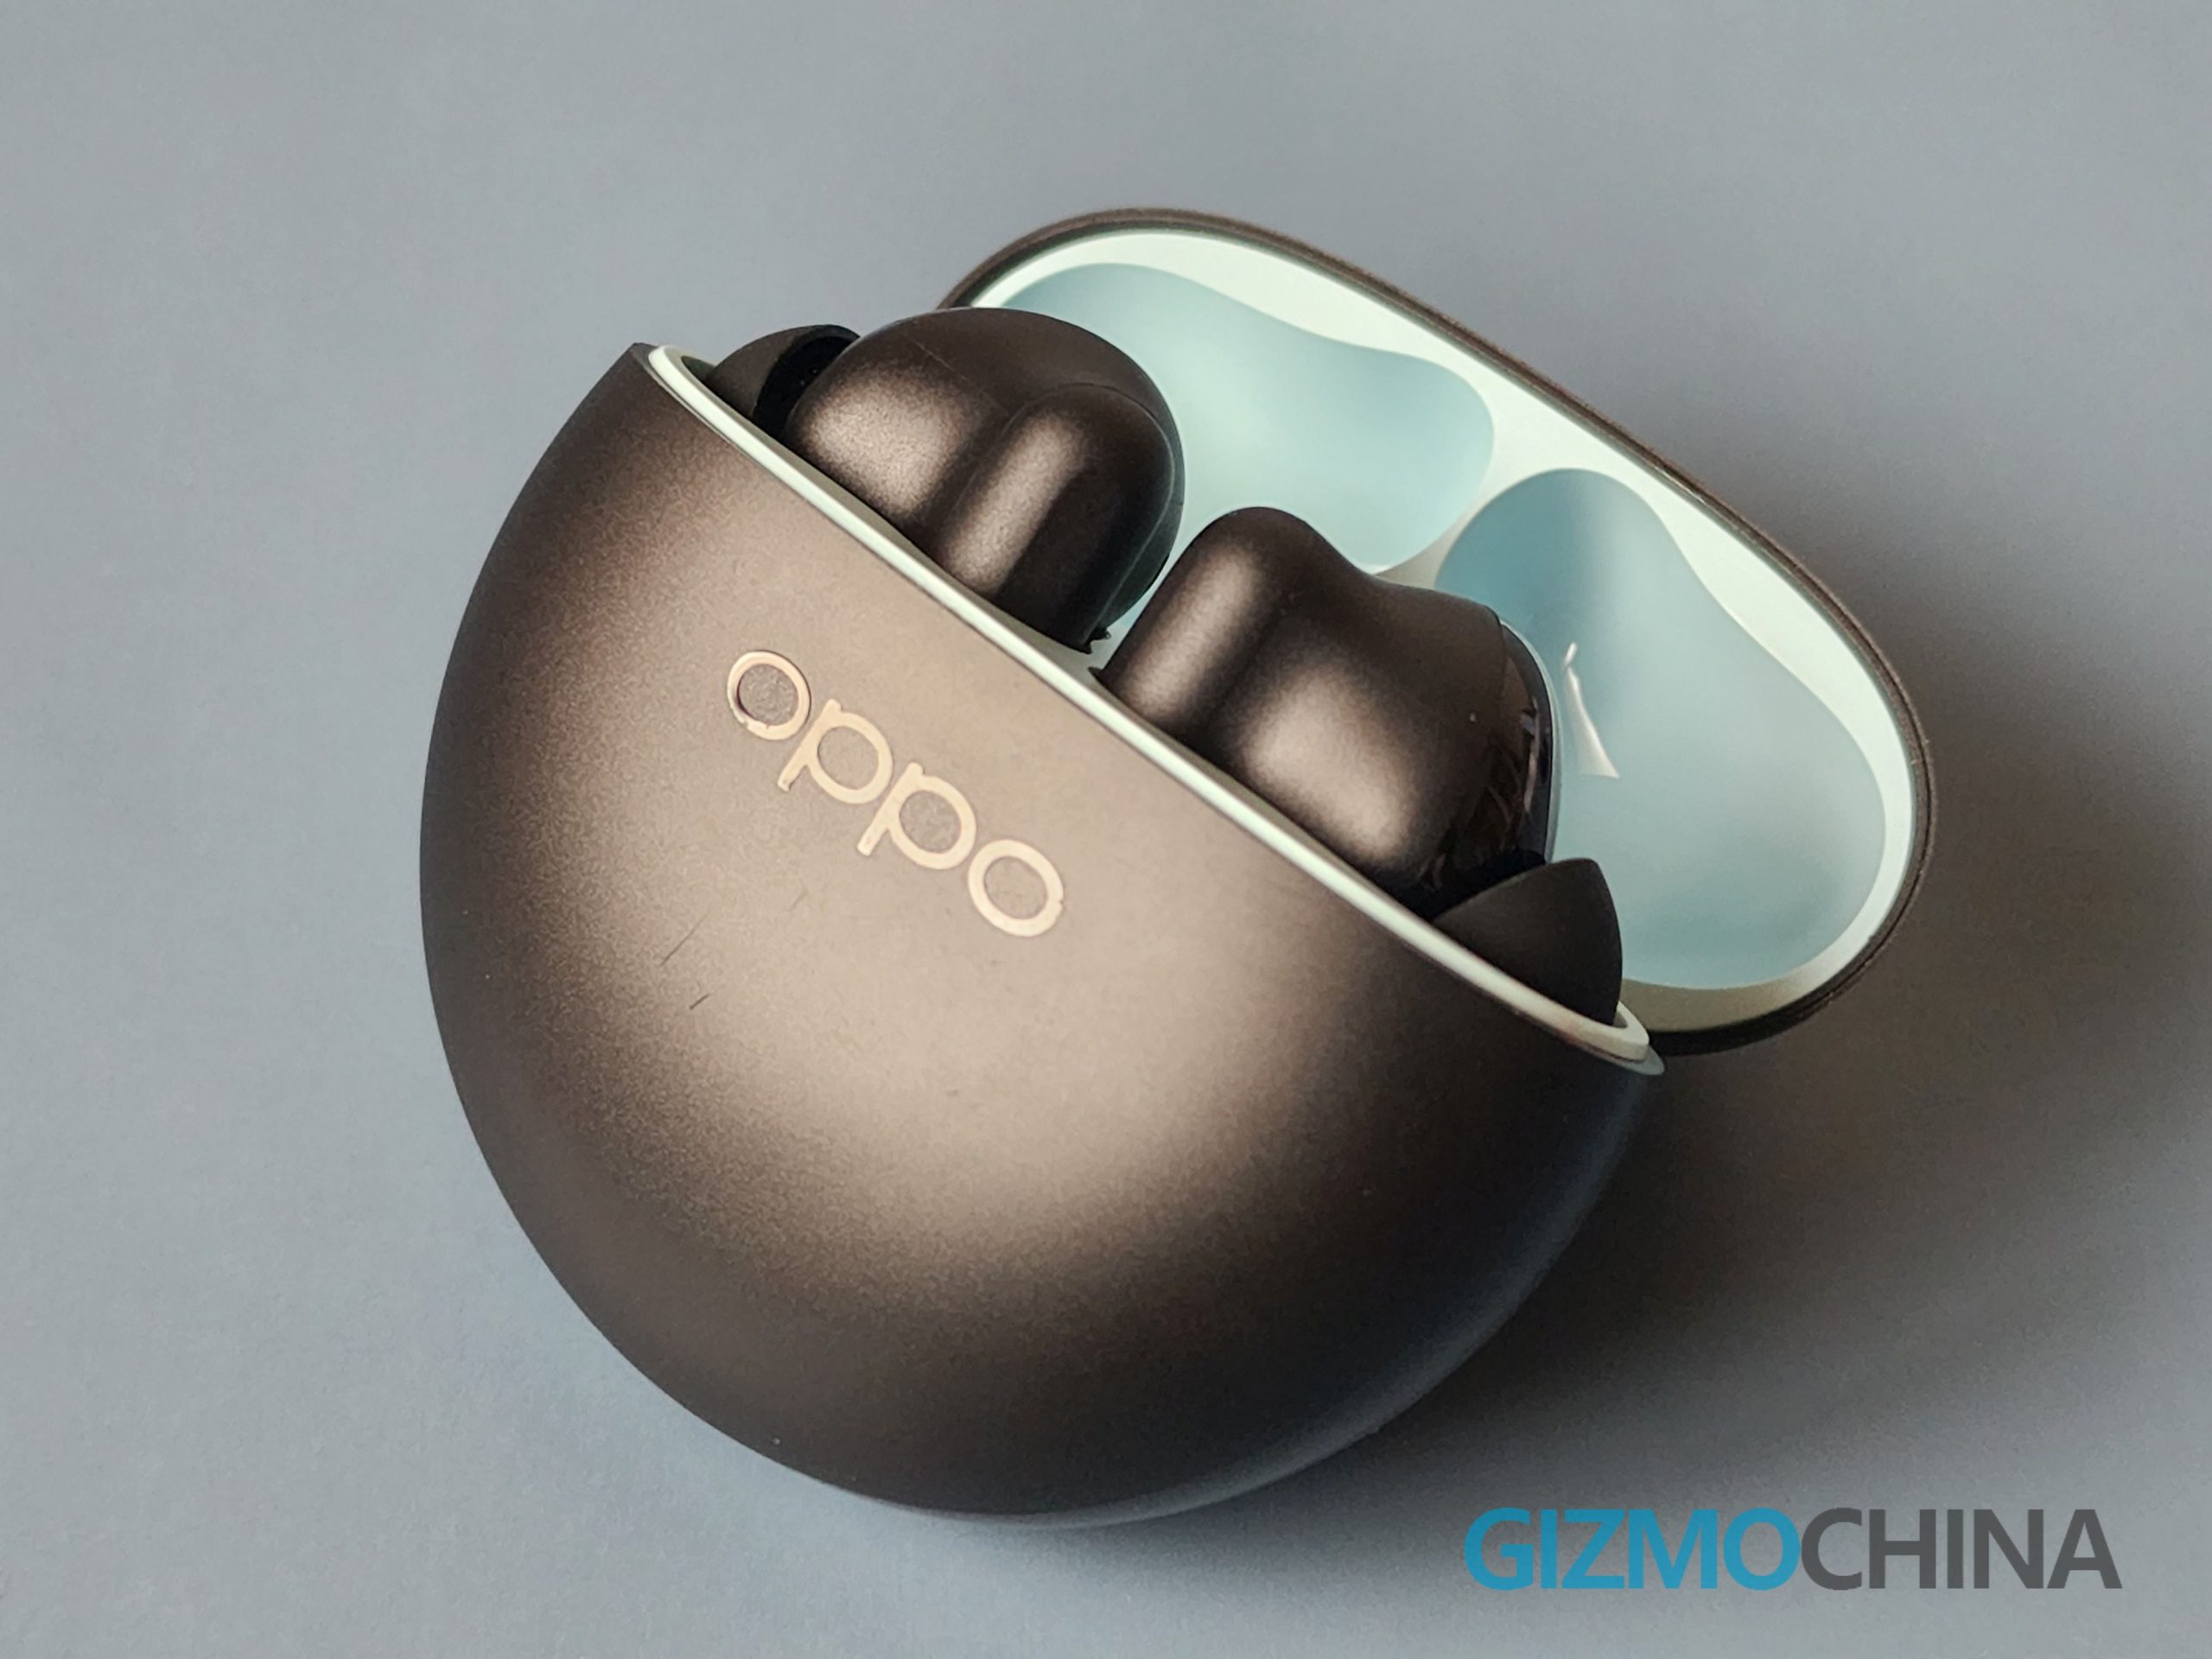 Oppo: Oppo Enco X2 TWS earbuds are confirmed to launch on July 18